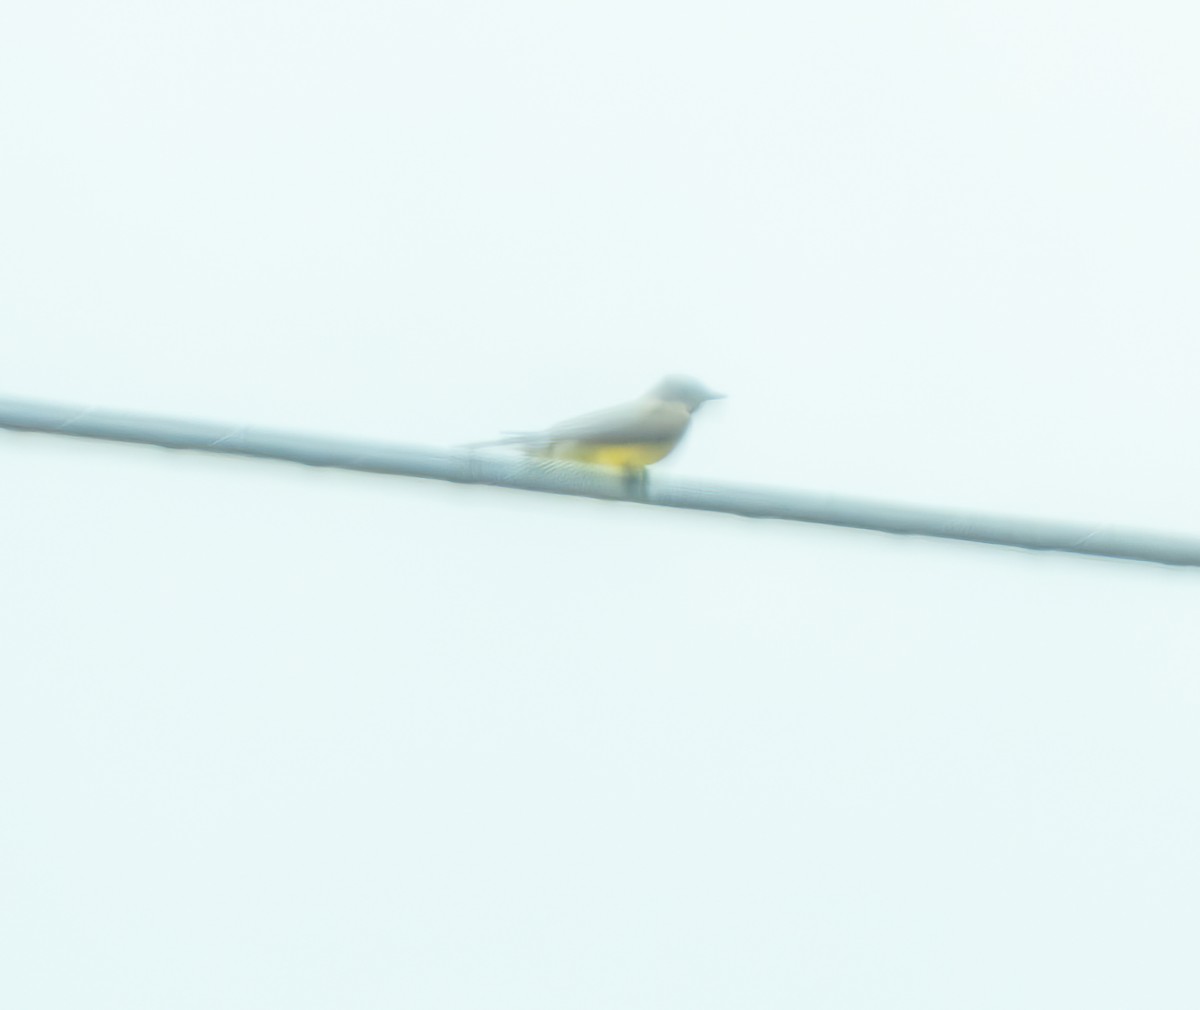 yellow-bellied kingbird sp. - Mary-Rose Hoang